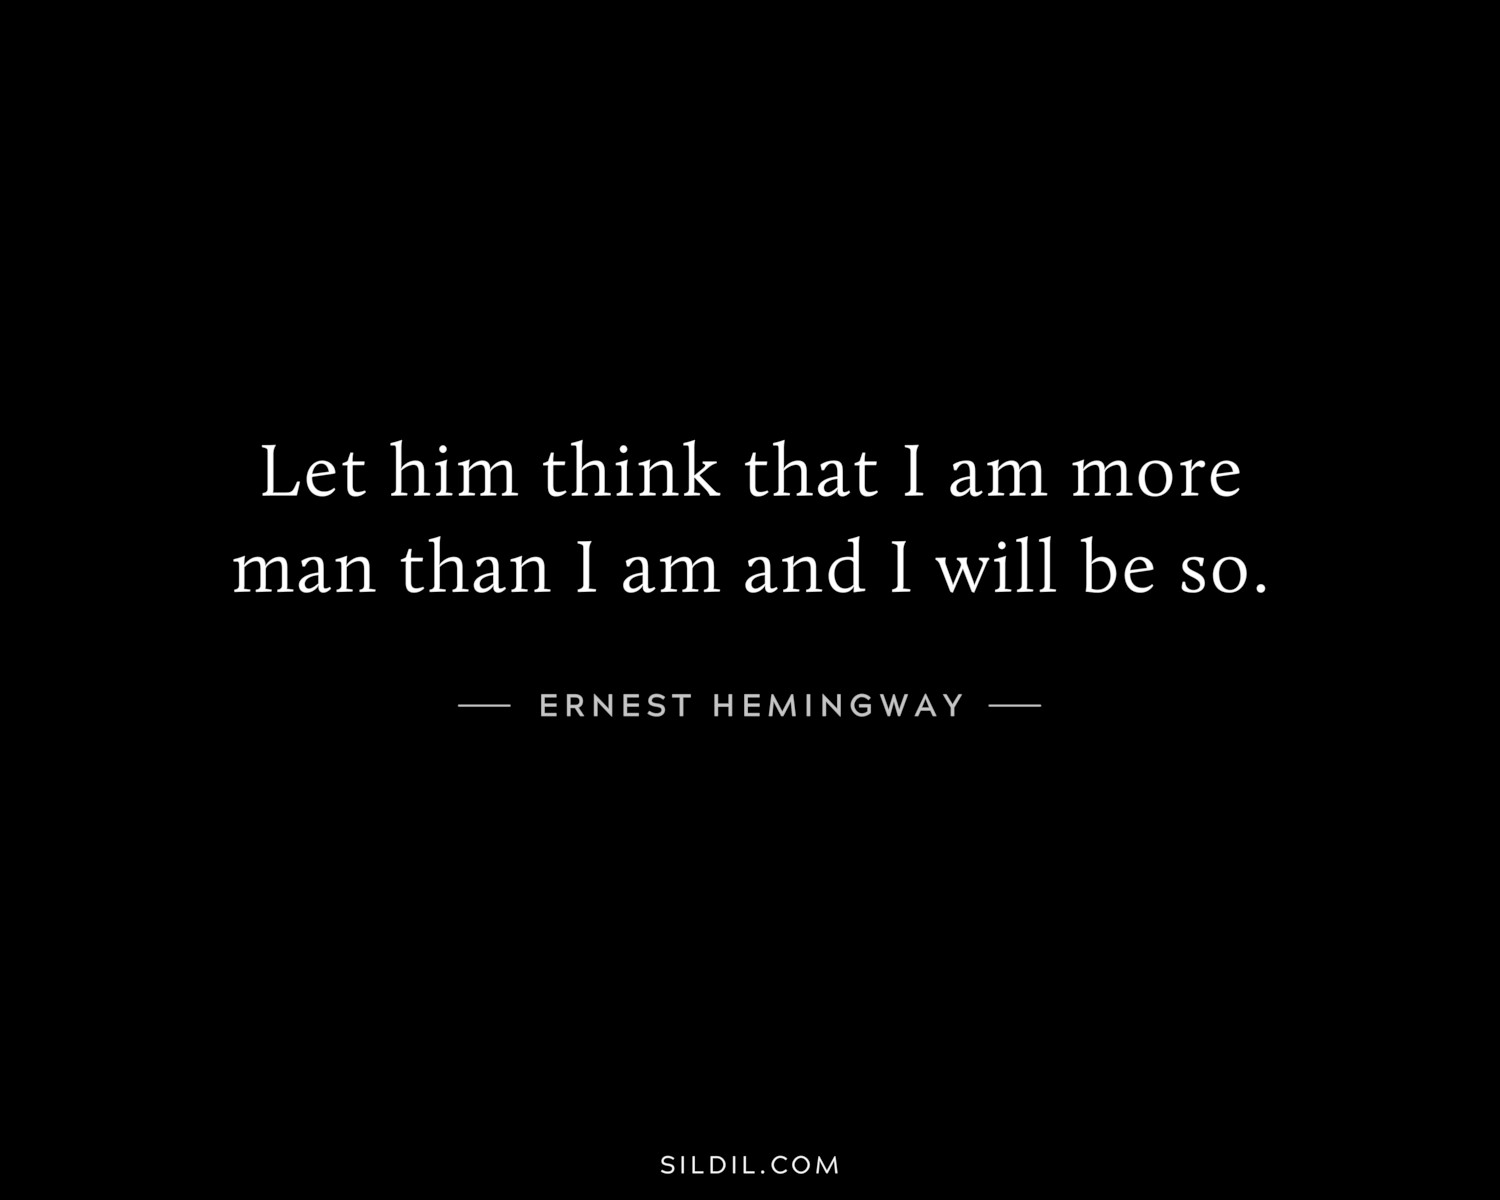 Let him think that I am more man than I am and I will be so.